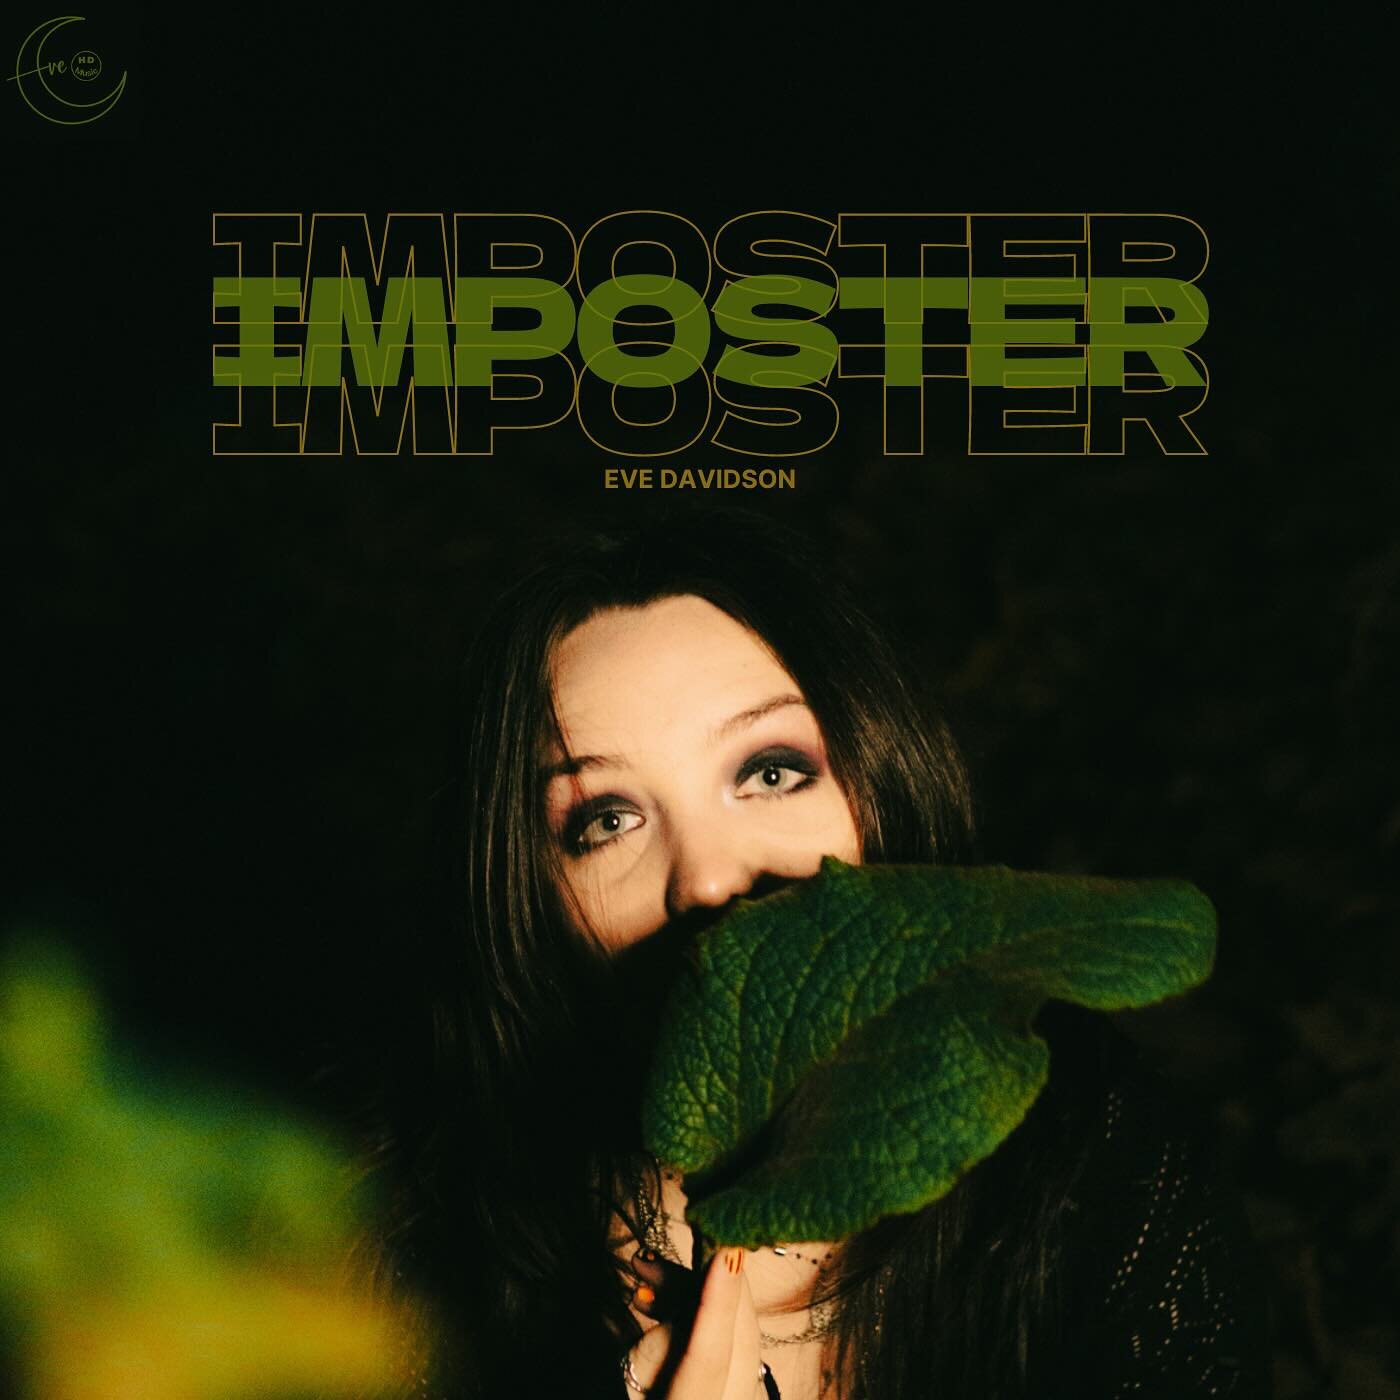 Imposter is out now!!! 
Go and stream Imposter on any and all streaming platforms! 
This song means so much to me and I am so happy to finally have it out in the world! Keep your eyes peeled for more Imposter content in the coming days! Let me know y